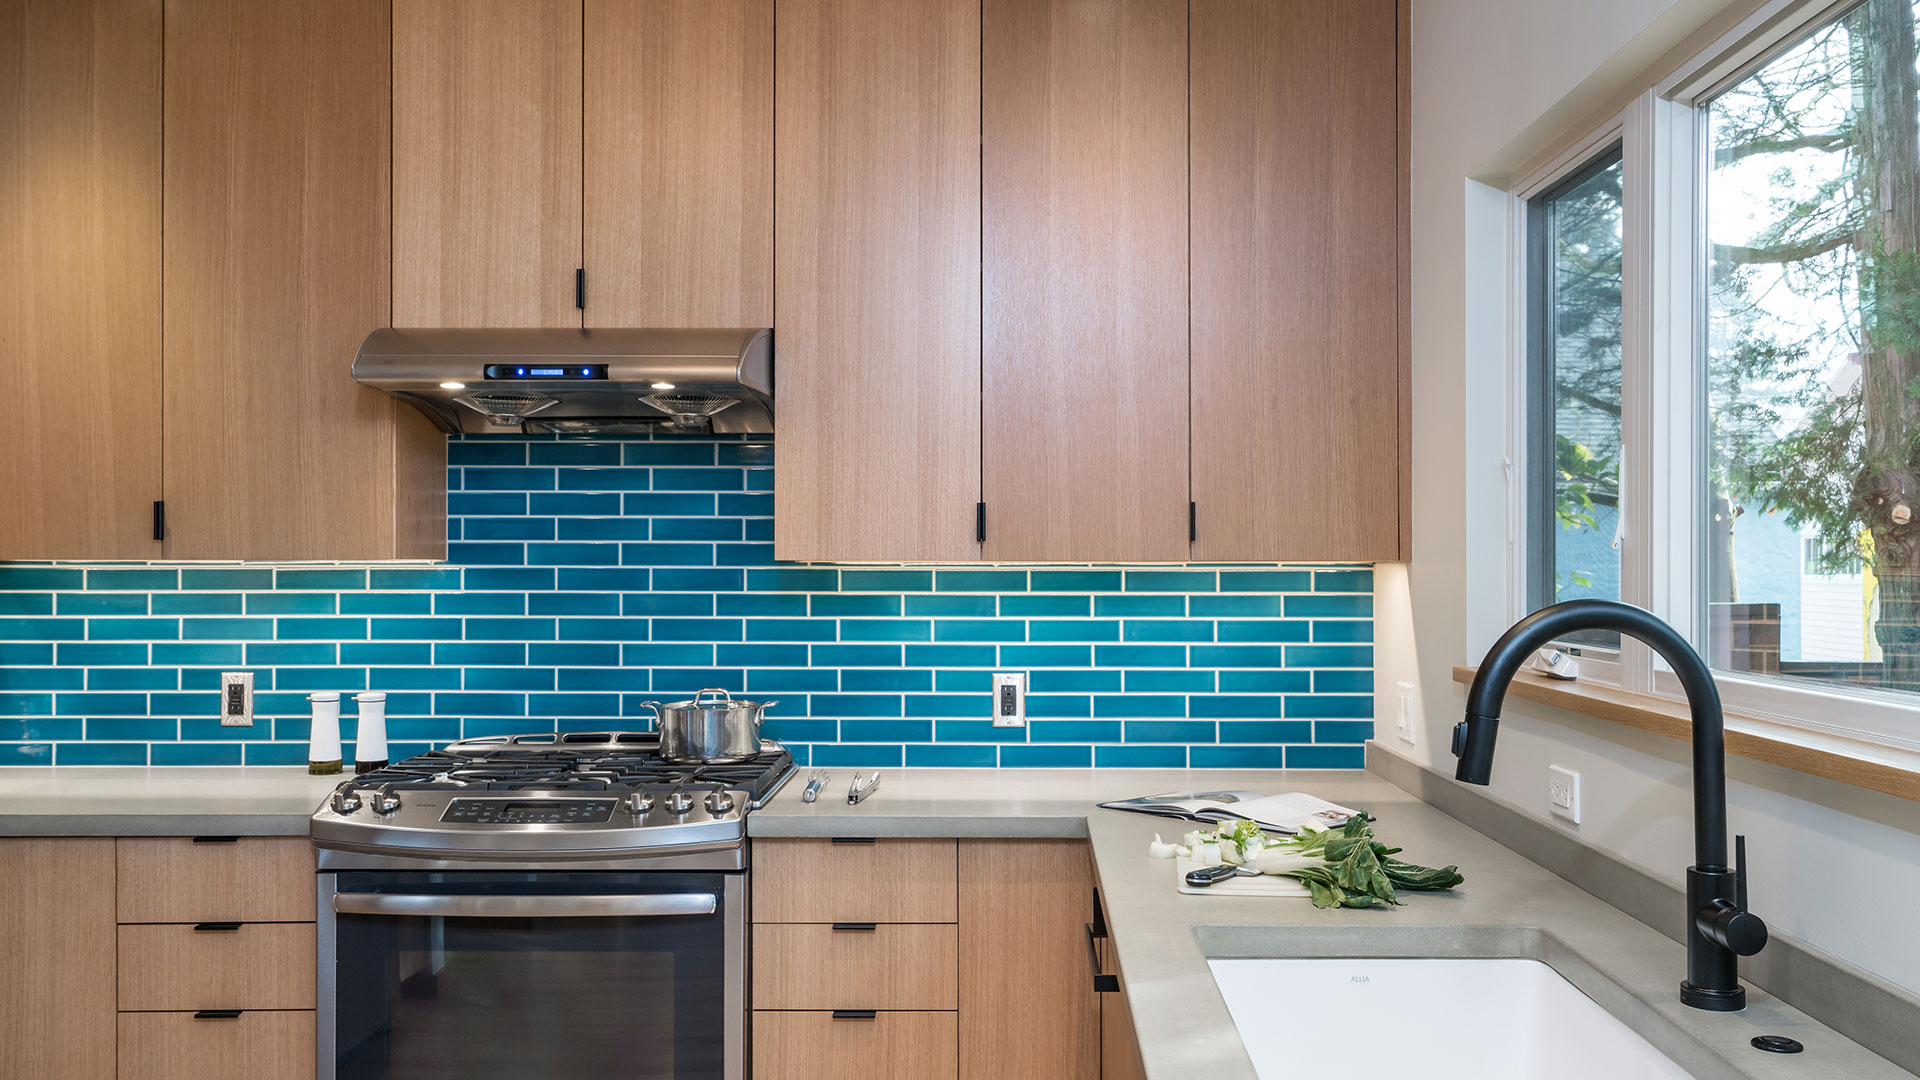 The kitchen at the Little Prescott House features rift white oak cabinets and concrete countertops. The backsplash is bright blue ceramic tile from Fireclay Tile. Fixtures and hardware are matte black.